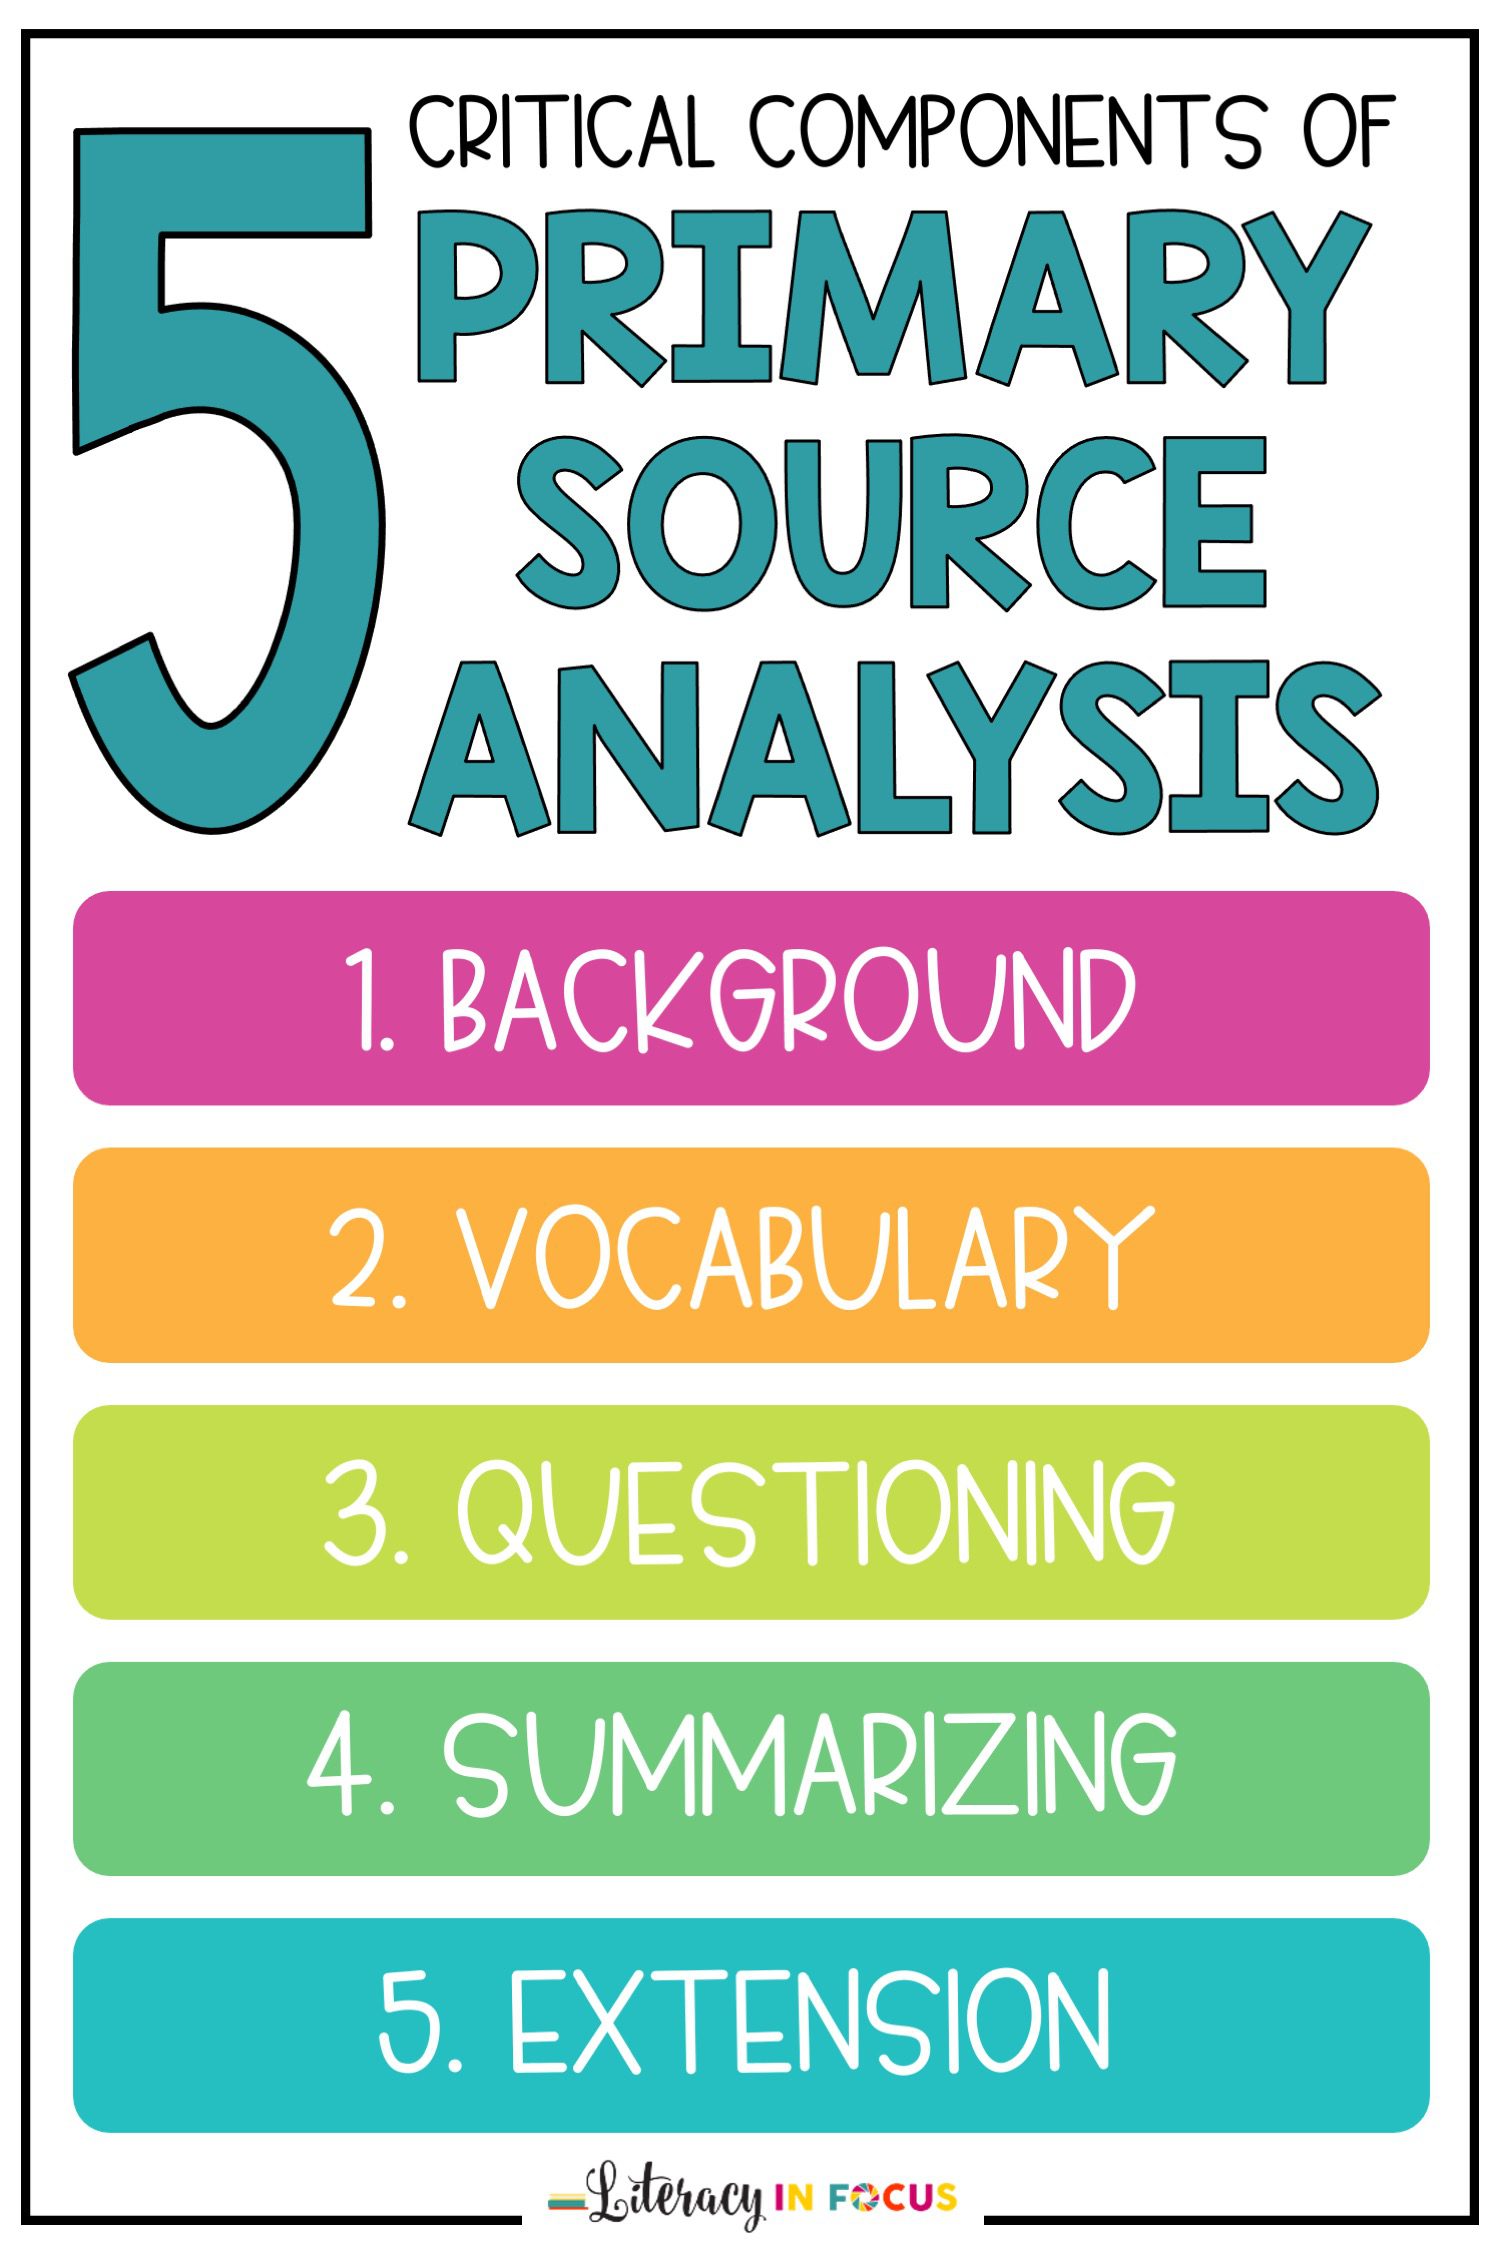 5 Critical Components of Primary Source Analysis